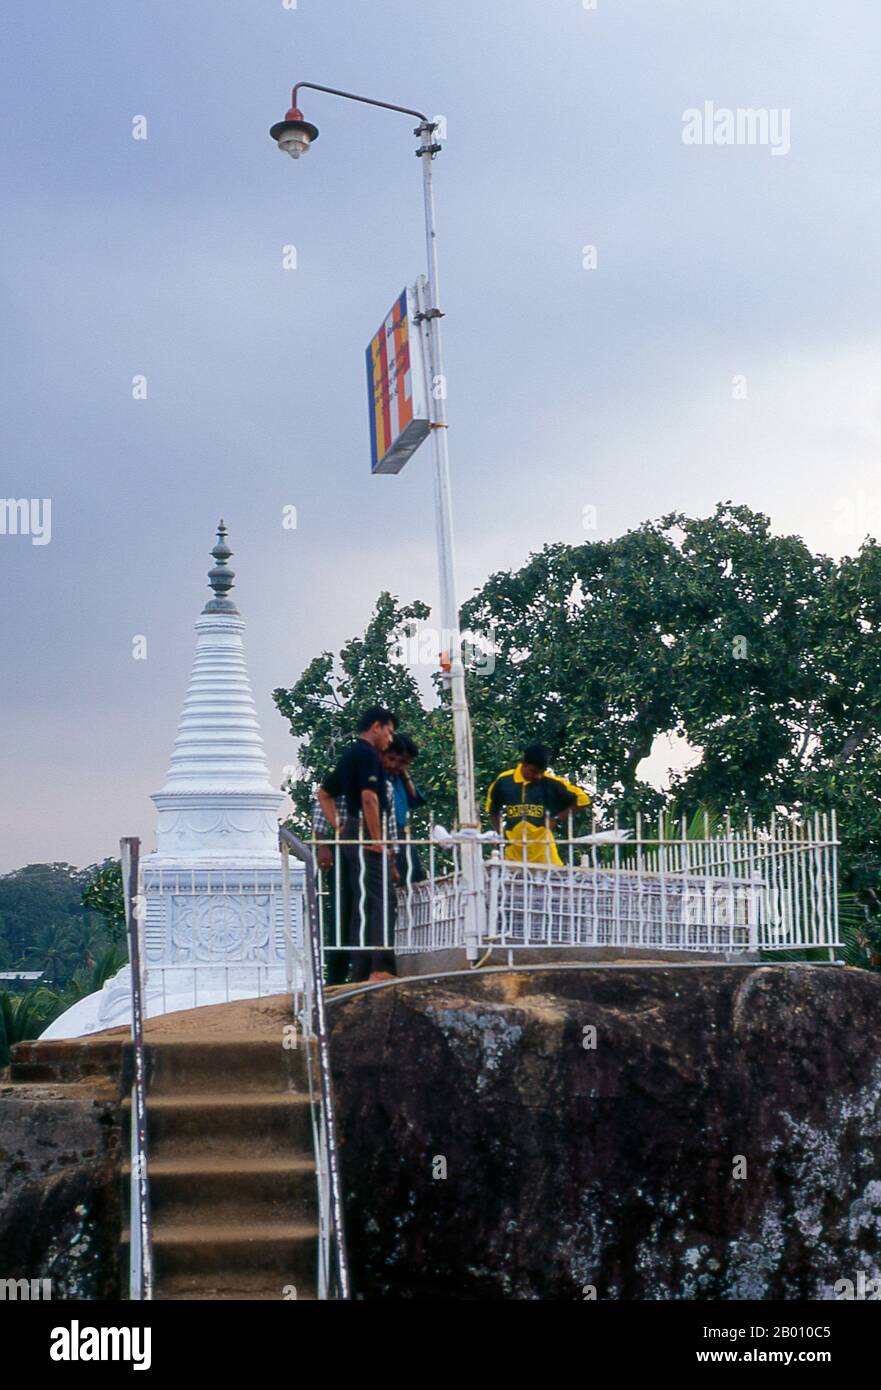 Sri Lanka: Visitors admire the view from Isurumuniya Vihara, Anuradhapura.  Isurumuniya Vihara is a rock temple built during the reign of King Devanampiya Tissa (r. 307 - 267 BCE).  Anuradhapura is one of Sri Lanka's ancient capitals and famous for its well-preserved ruins. From the 4th century BCE until the beginning of the 11th century CE it was the capital. During this period it remained one of the most stable and durable centers of political power and urban life in South Asia. The ancient city, considered sacred to the Buddhist world, is today surrounded by monasteries. Stock Photo